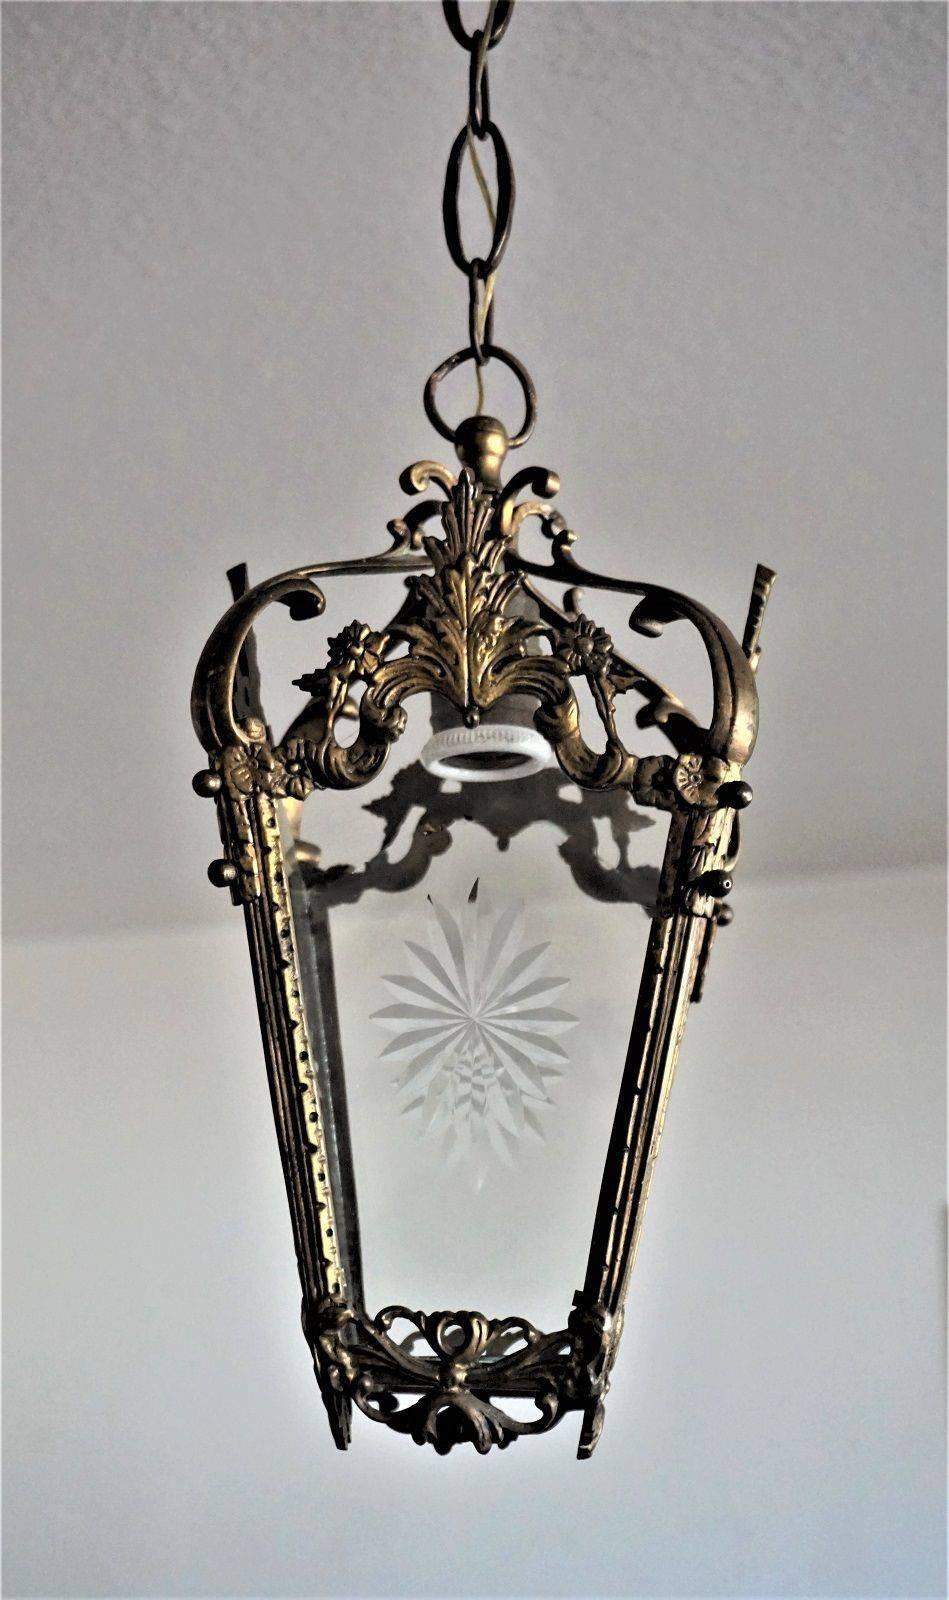 French Art Nouveau bronze cut-glass lantern, circa 1910.

Very good condition, with beautiful patina of age.

One large light socket
Measures:
Total height 32.25 in (82 cm) 
Height without hanging chain 14 in (35.5 cm)
Width/depth 6.75 in